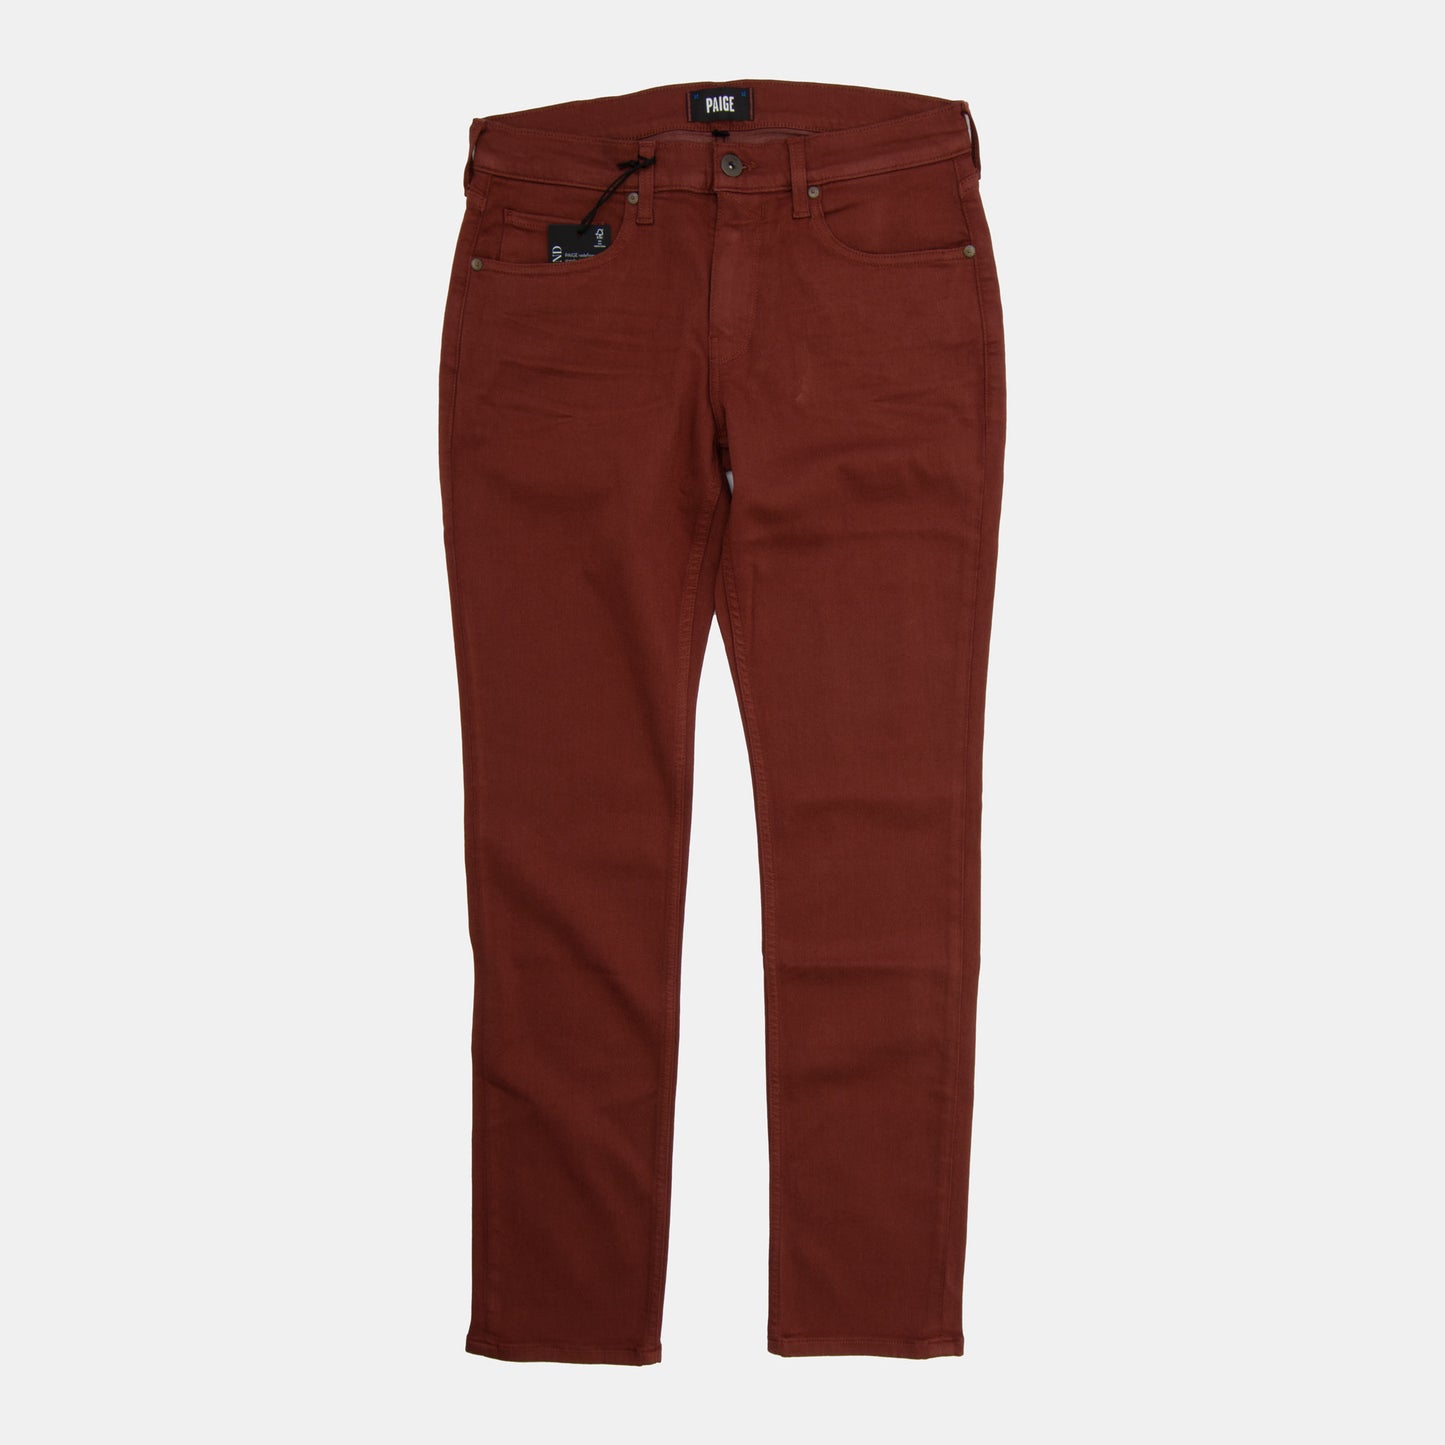 Paige - Lennox Slim 5-Pocket Pant in Cherry Cola Red